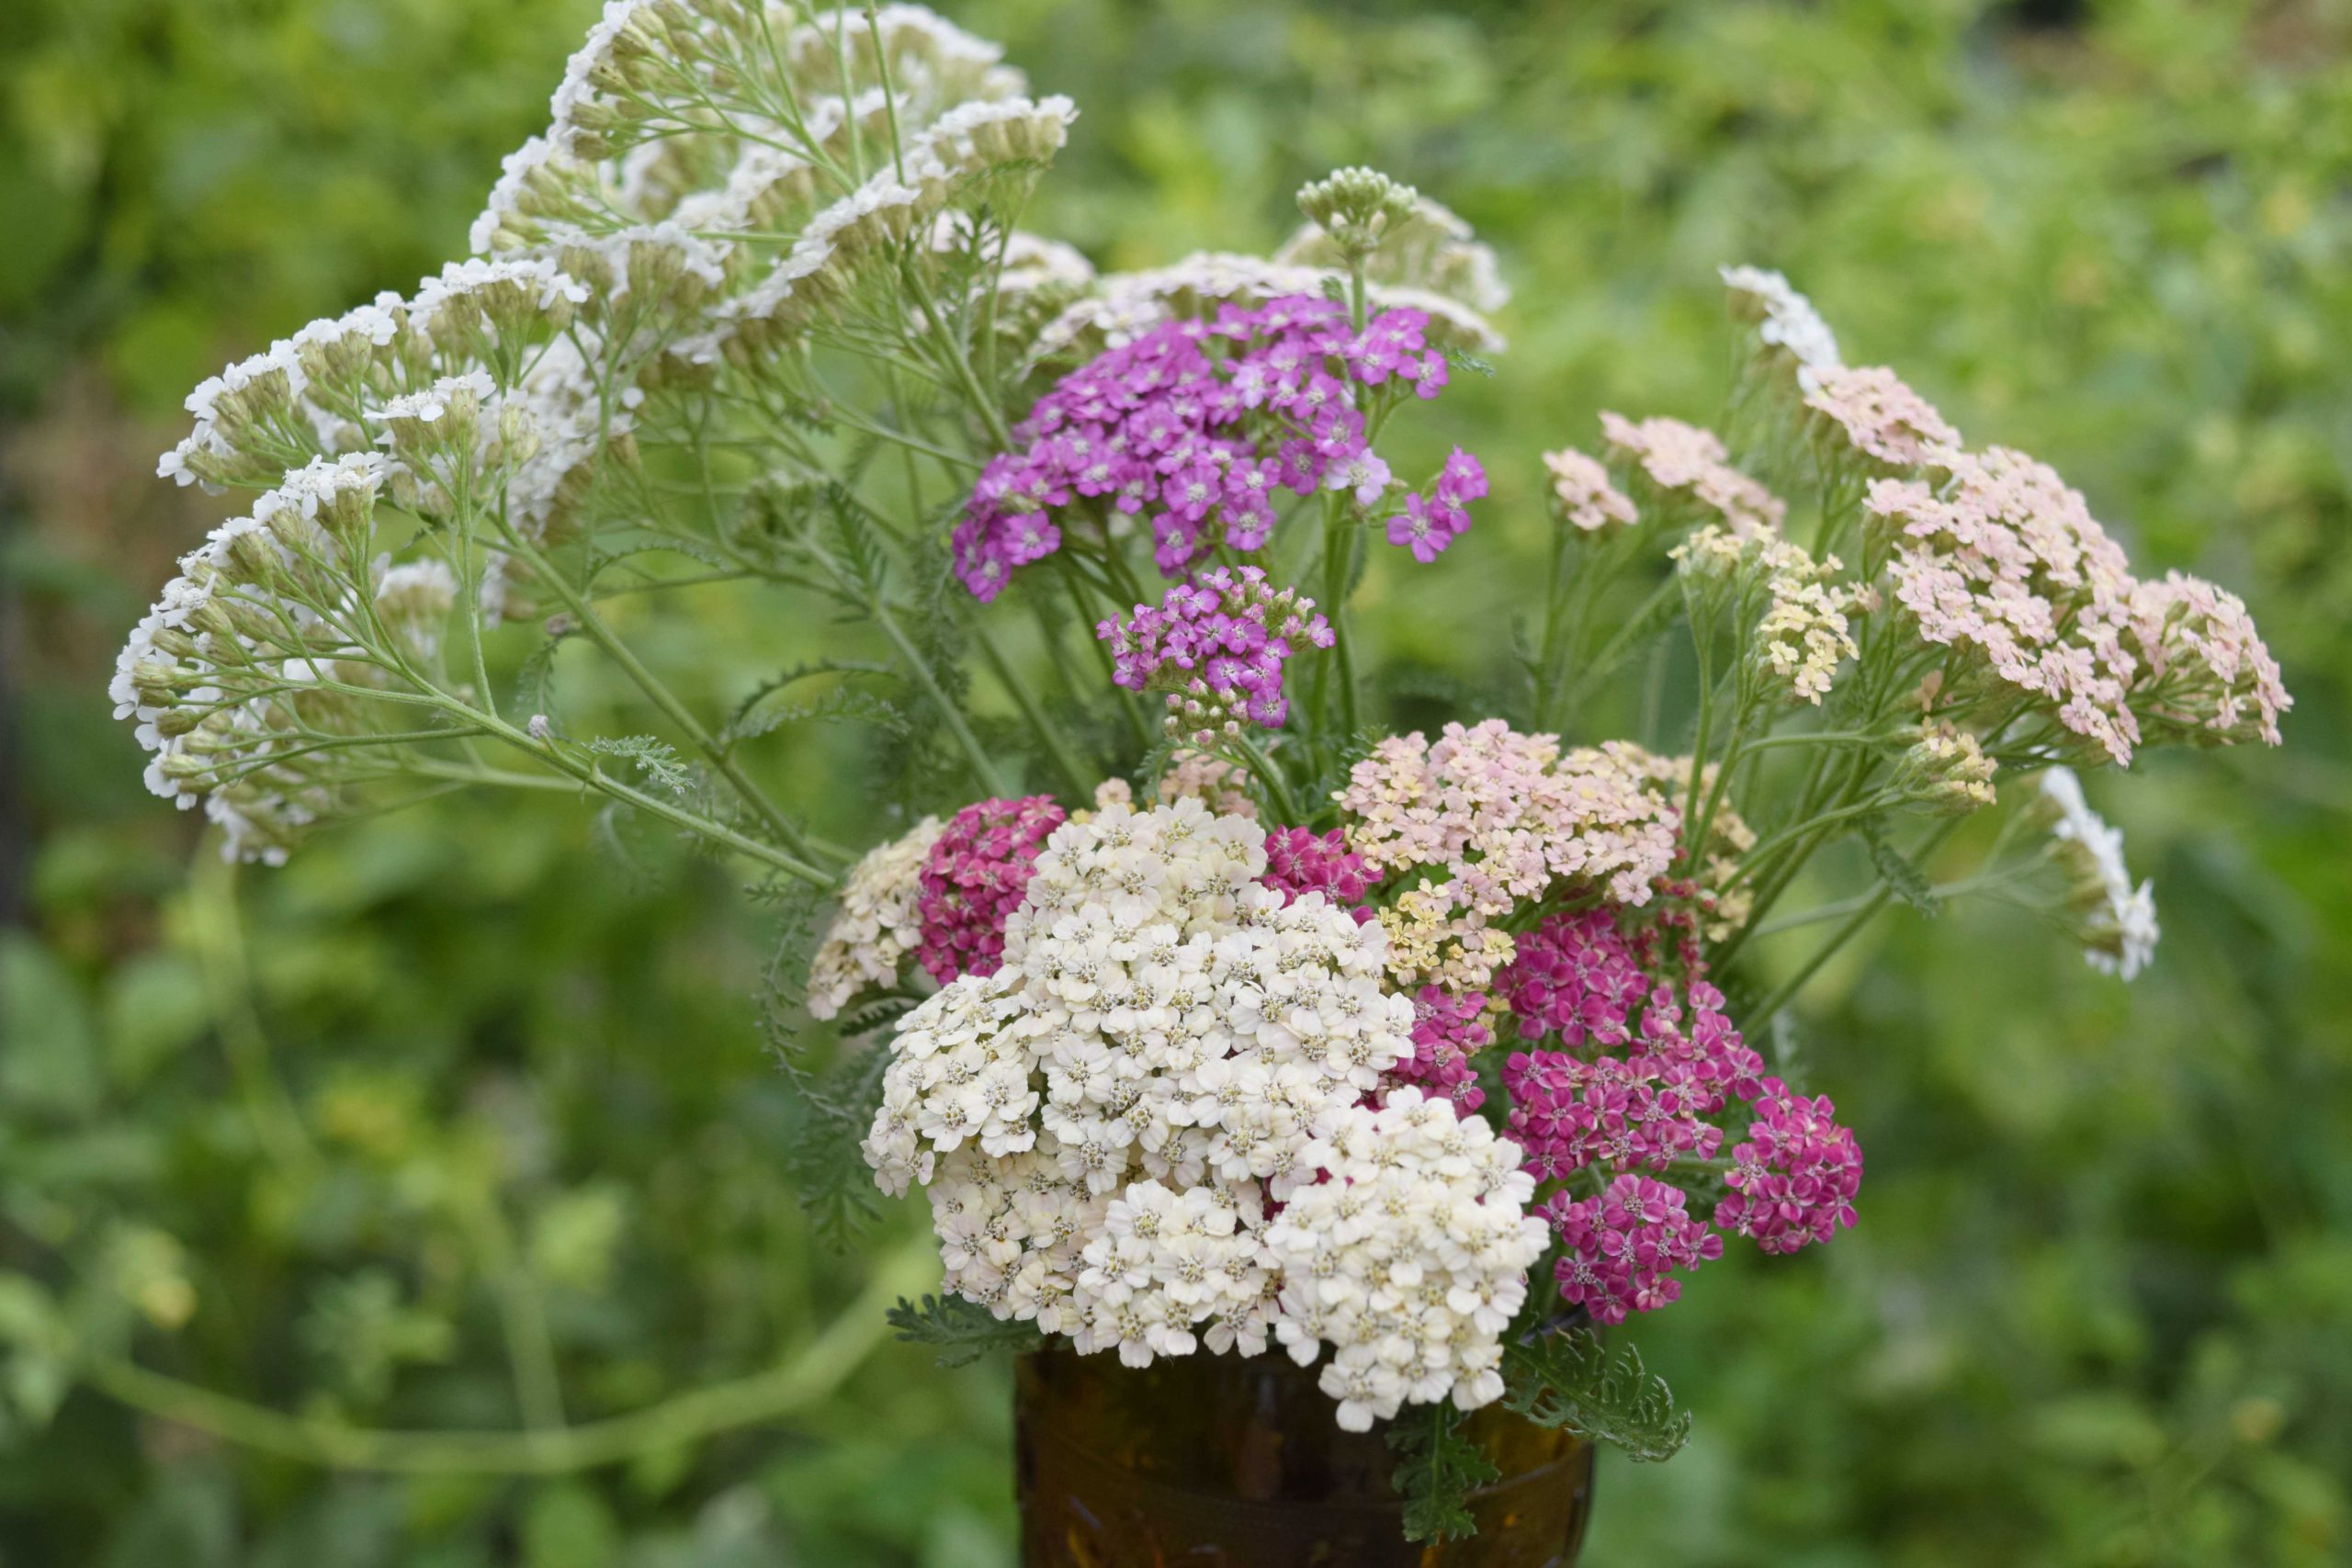 https://freckledcalifornian.com/wp-content/uploads/2020/06/mixed-bouquet-of-freshly-cut-yarrow-flowers-scaled.jpg